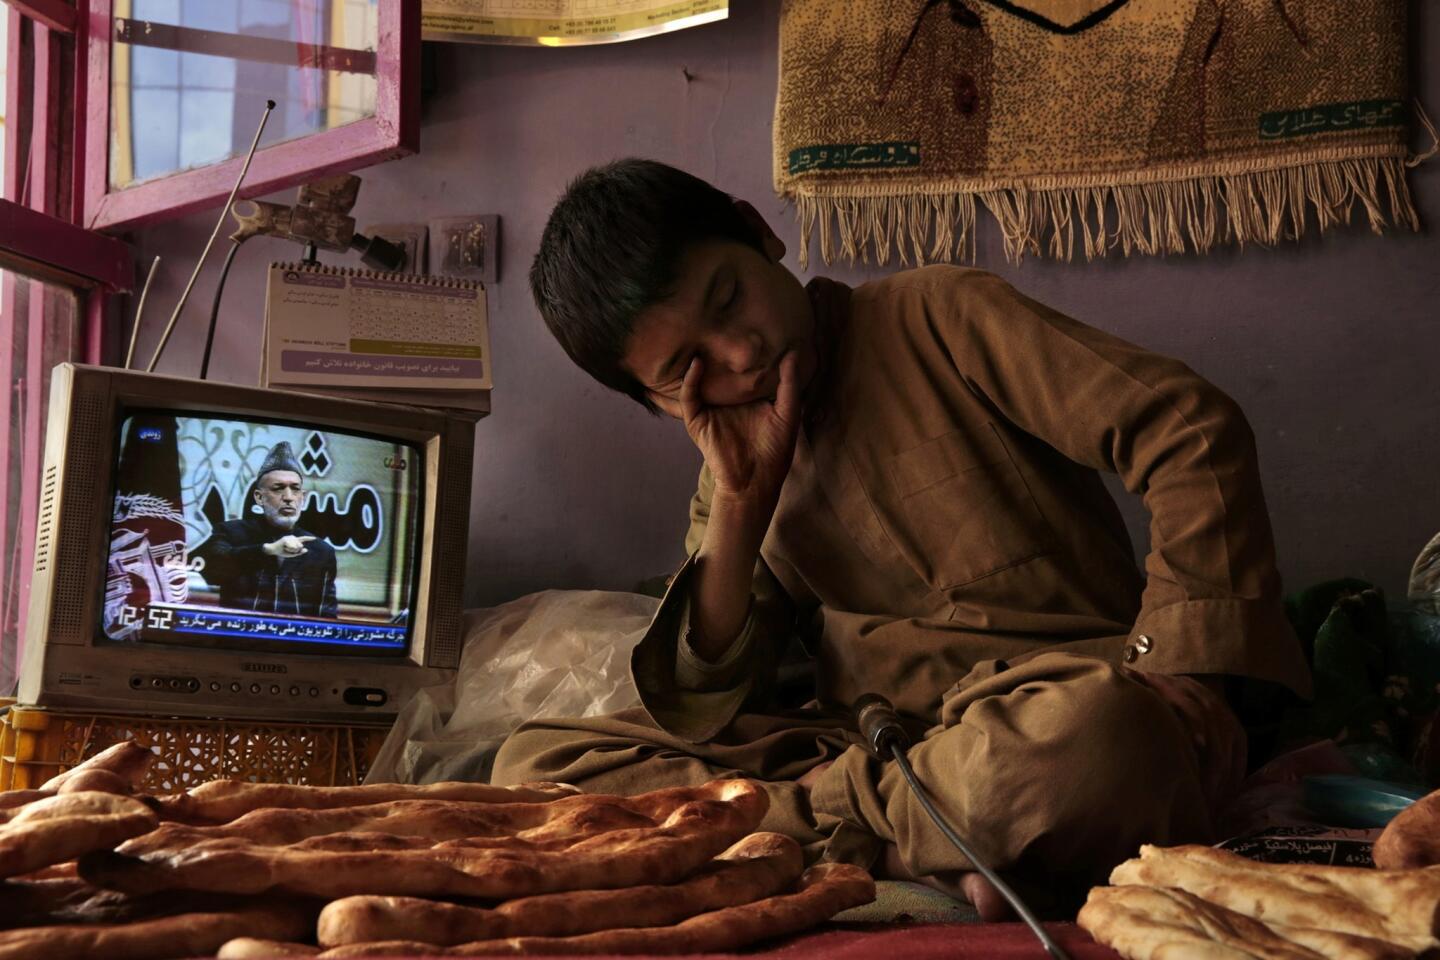 Sami Rahimi, 13, rests his head momentarily as a speech by Afghan President Hamid Karzai airs on a television in the Kabul bakery where he works. He begins his day before dawn.